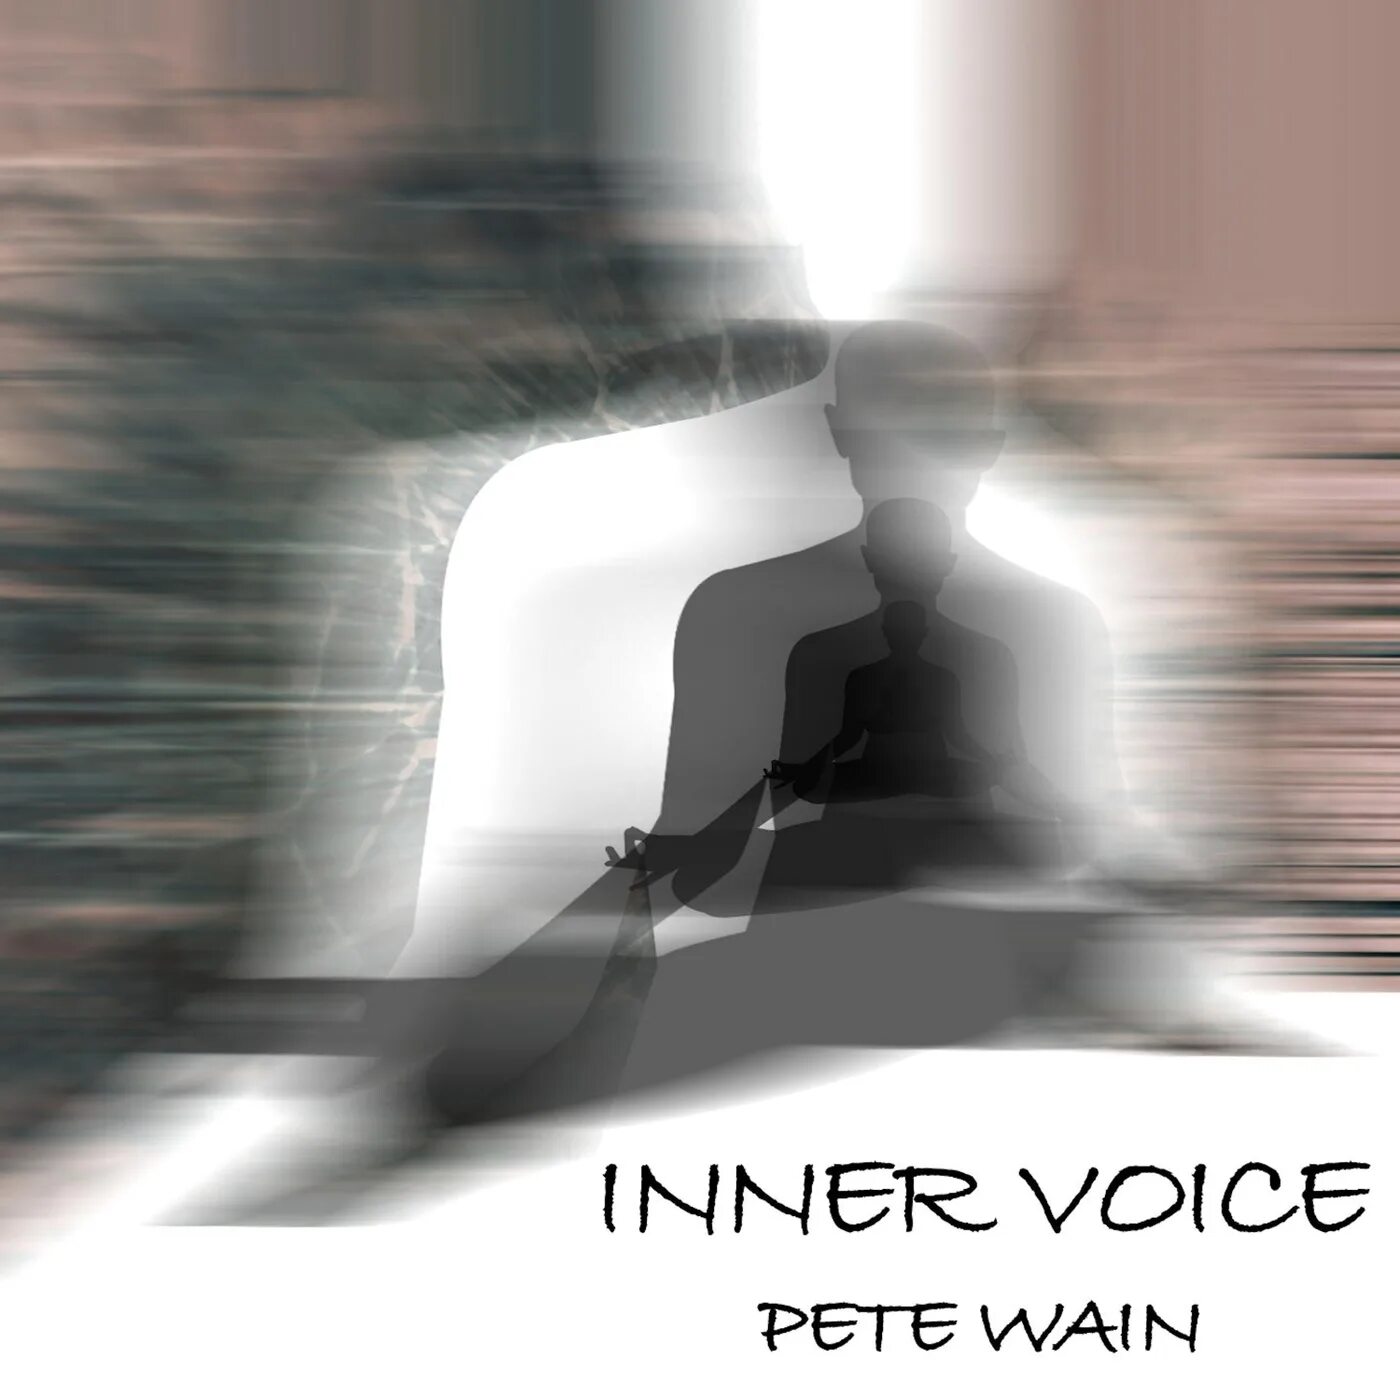 Inner Voices. Into Inner Voice. Trust Inner Voice. Inner Voices pictures. Things voice